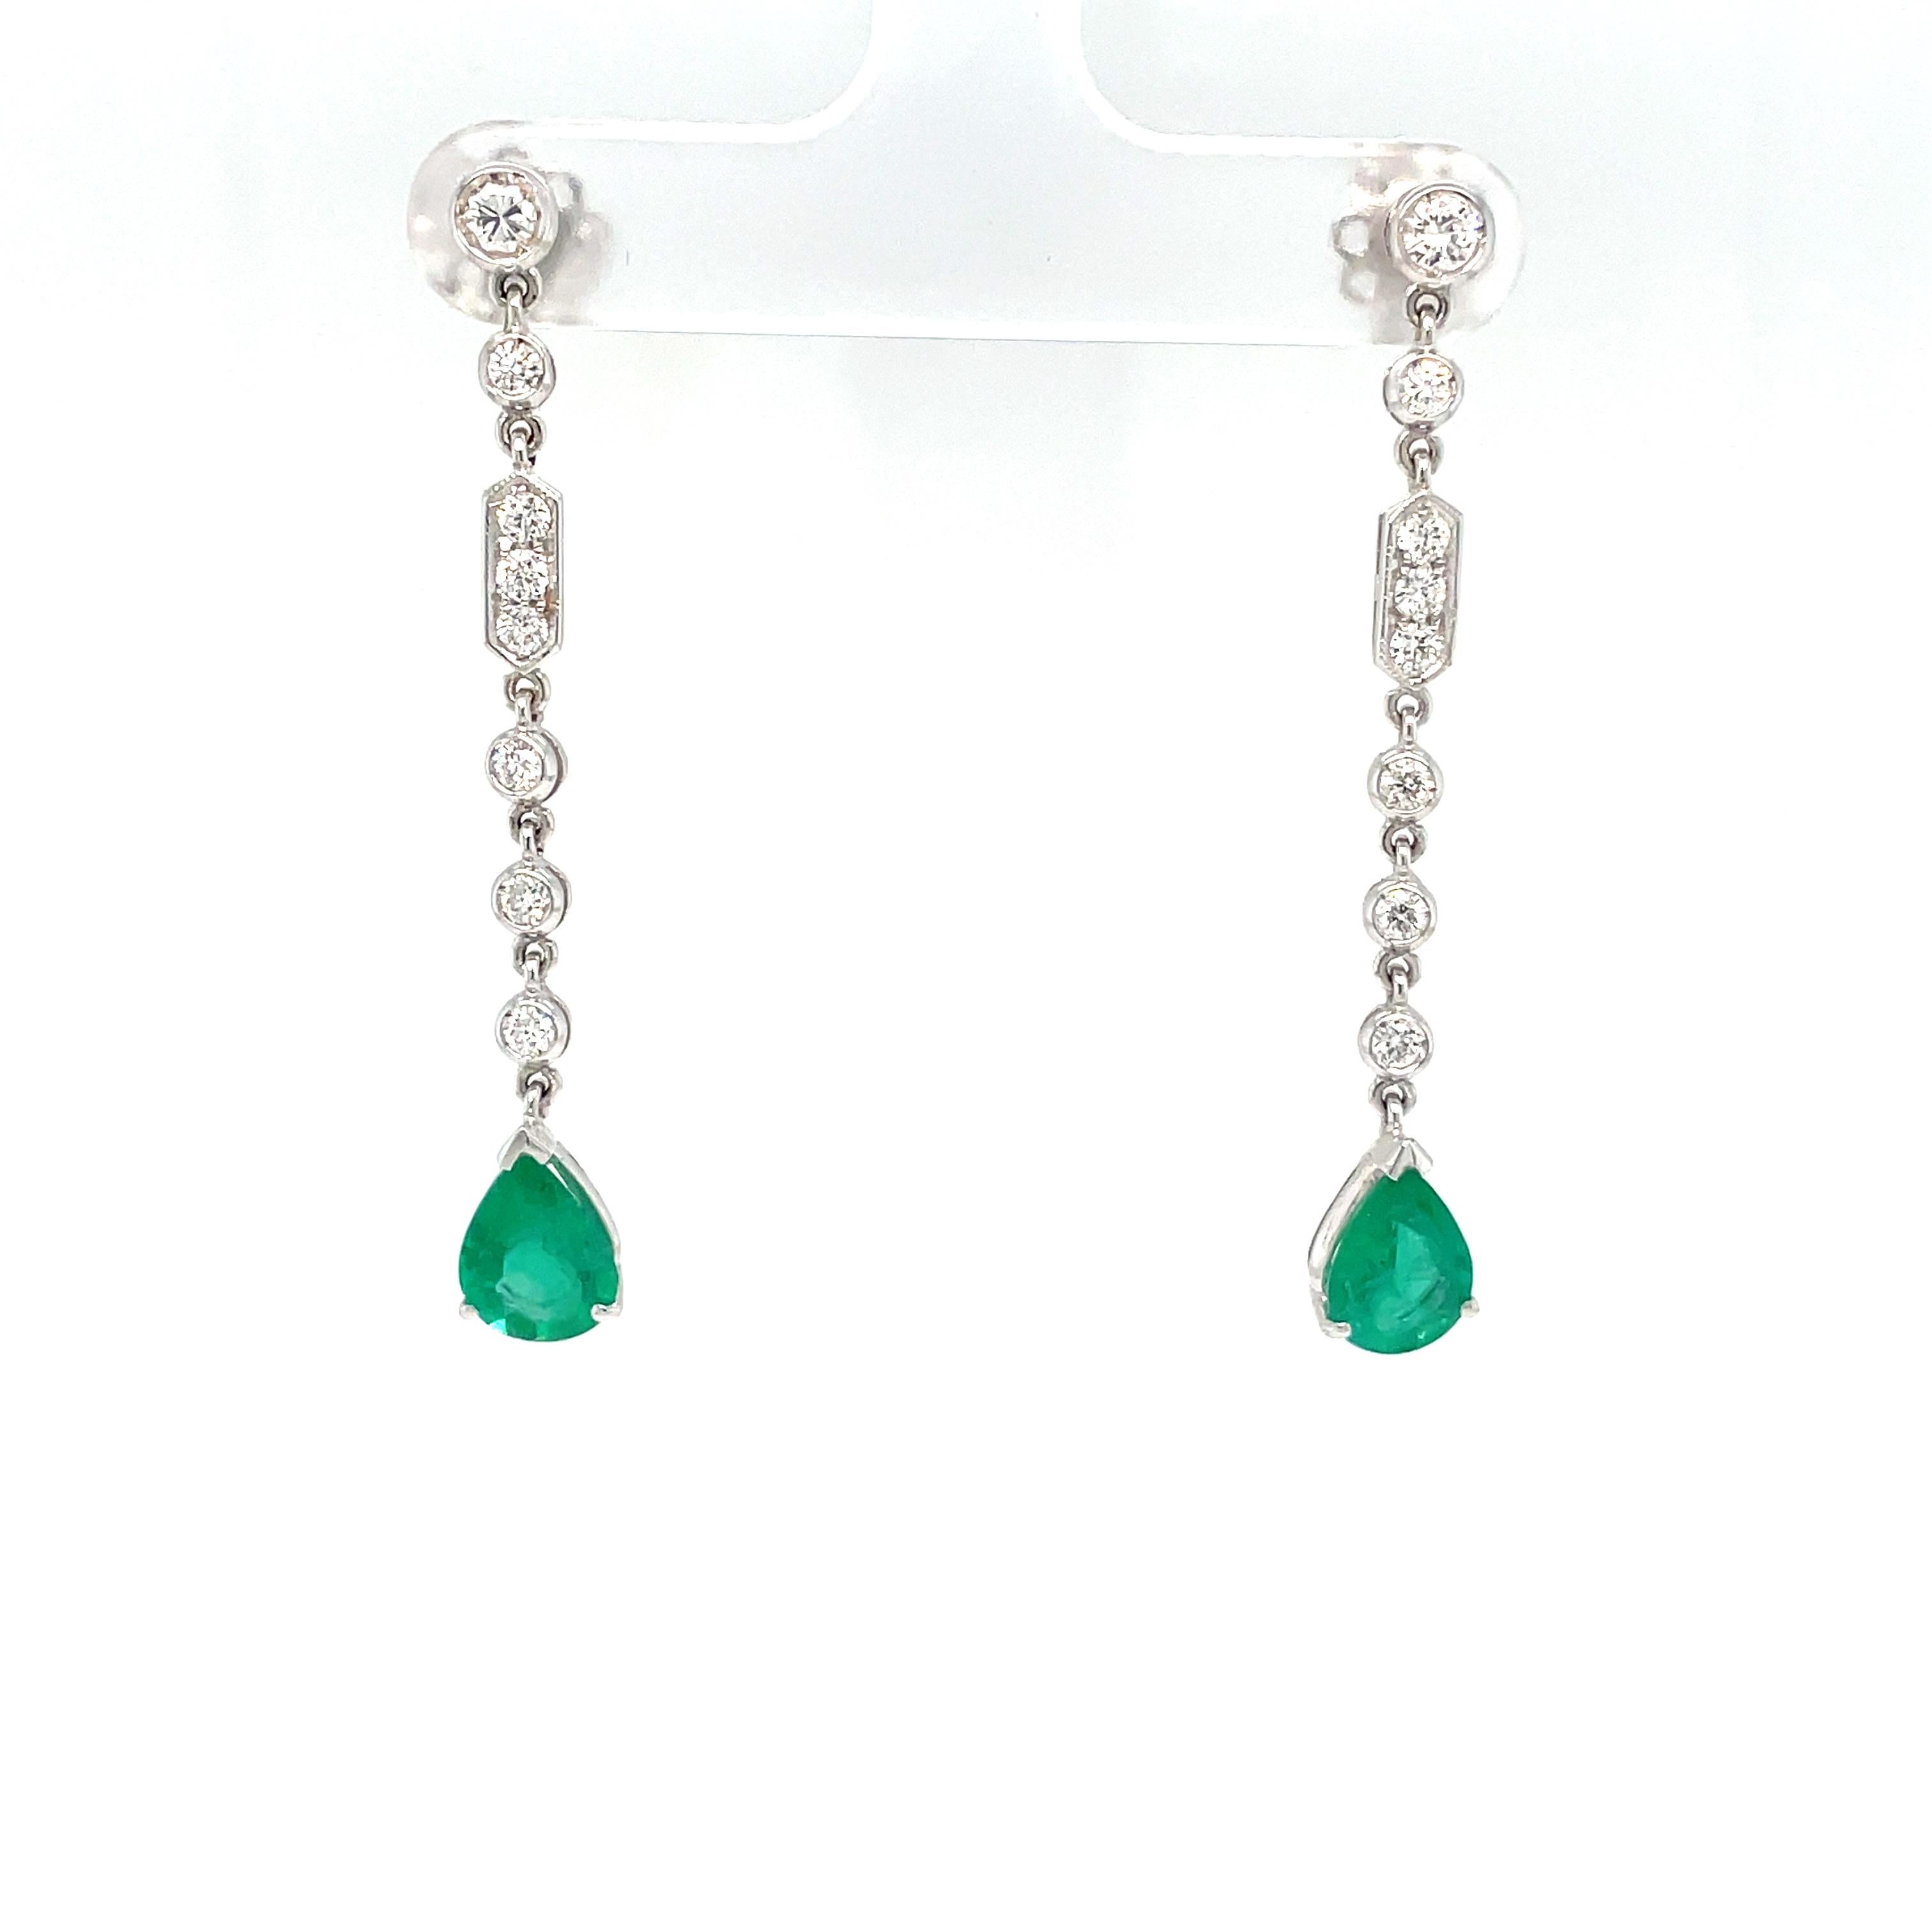 Beautiful and elegant Italian Estate 18k white gold earrings

They feature at the bottom 2 large Pear shaped Natural Colombian Emeralds, weighing 1.10 carat each, connected by links, inspired by Art Deco design, set with colorless round Diamonds